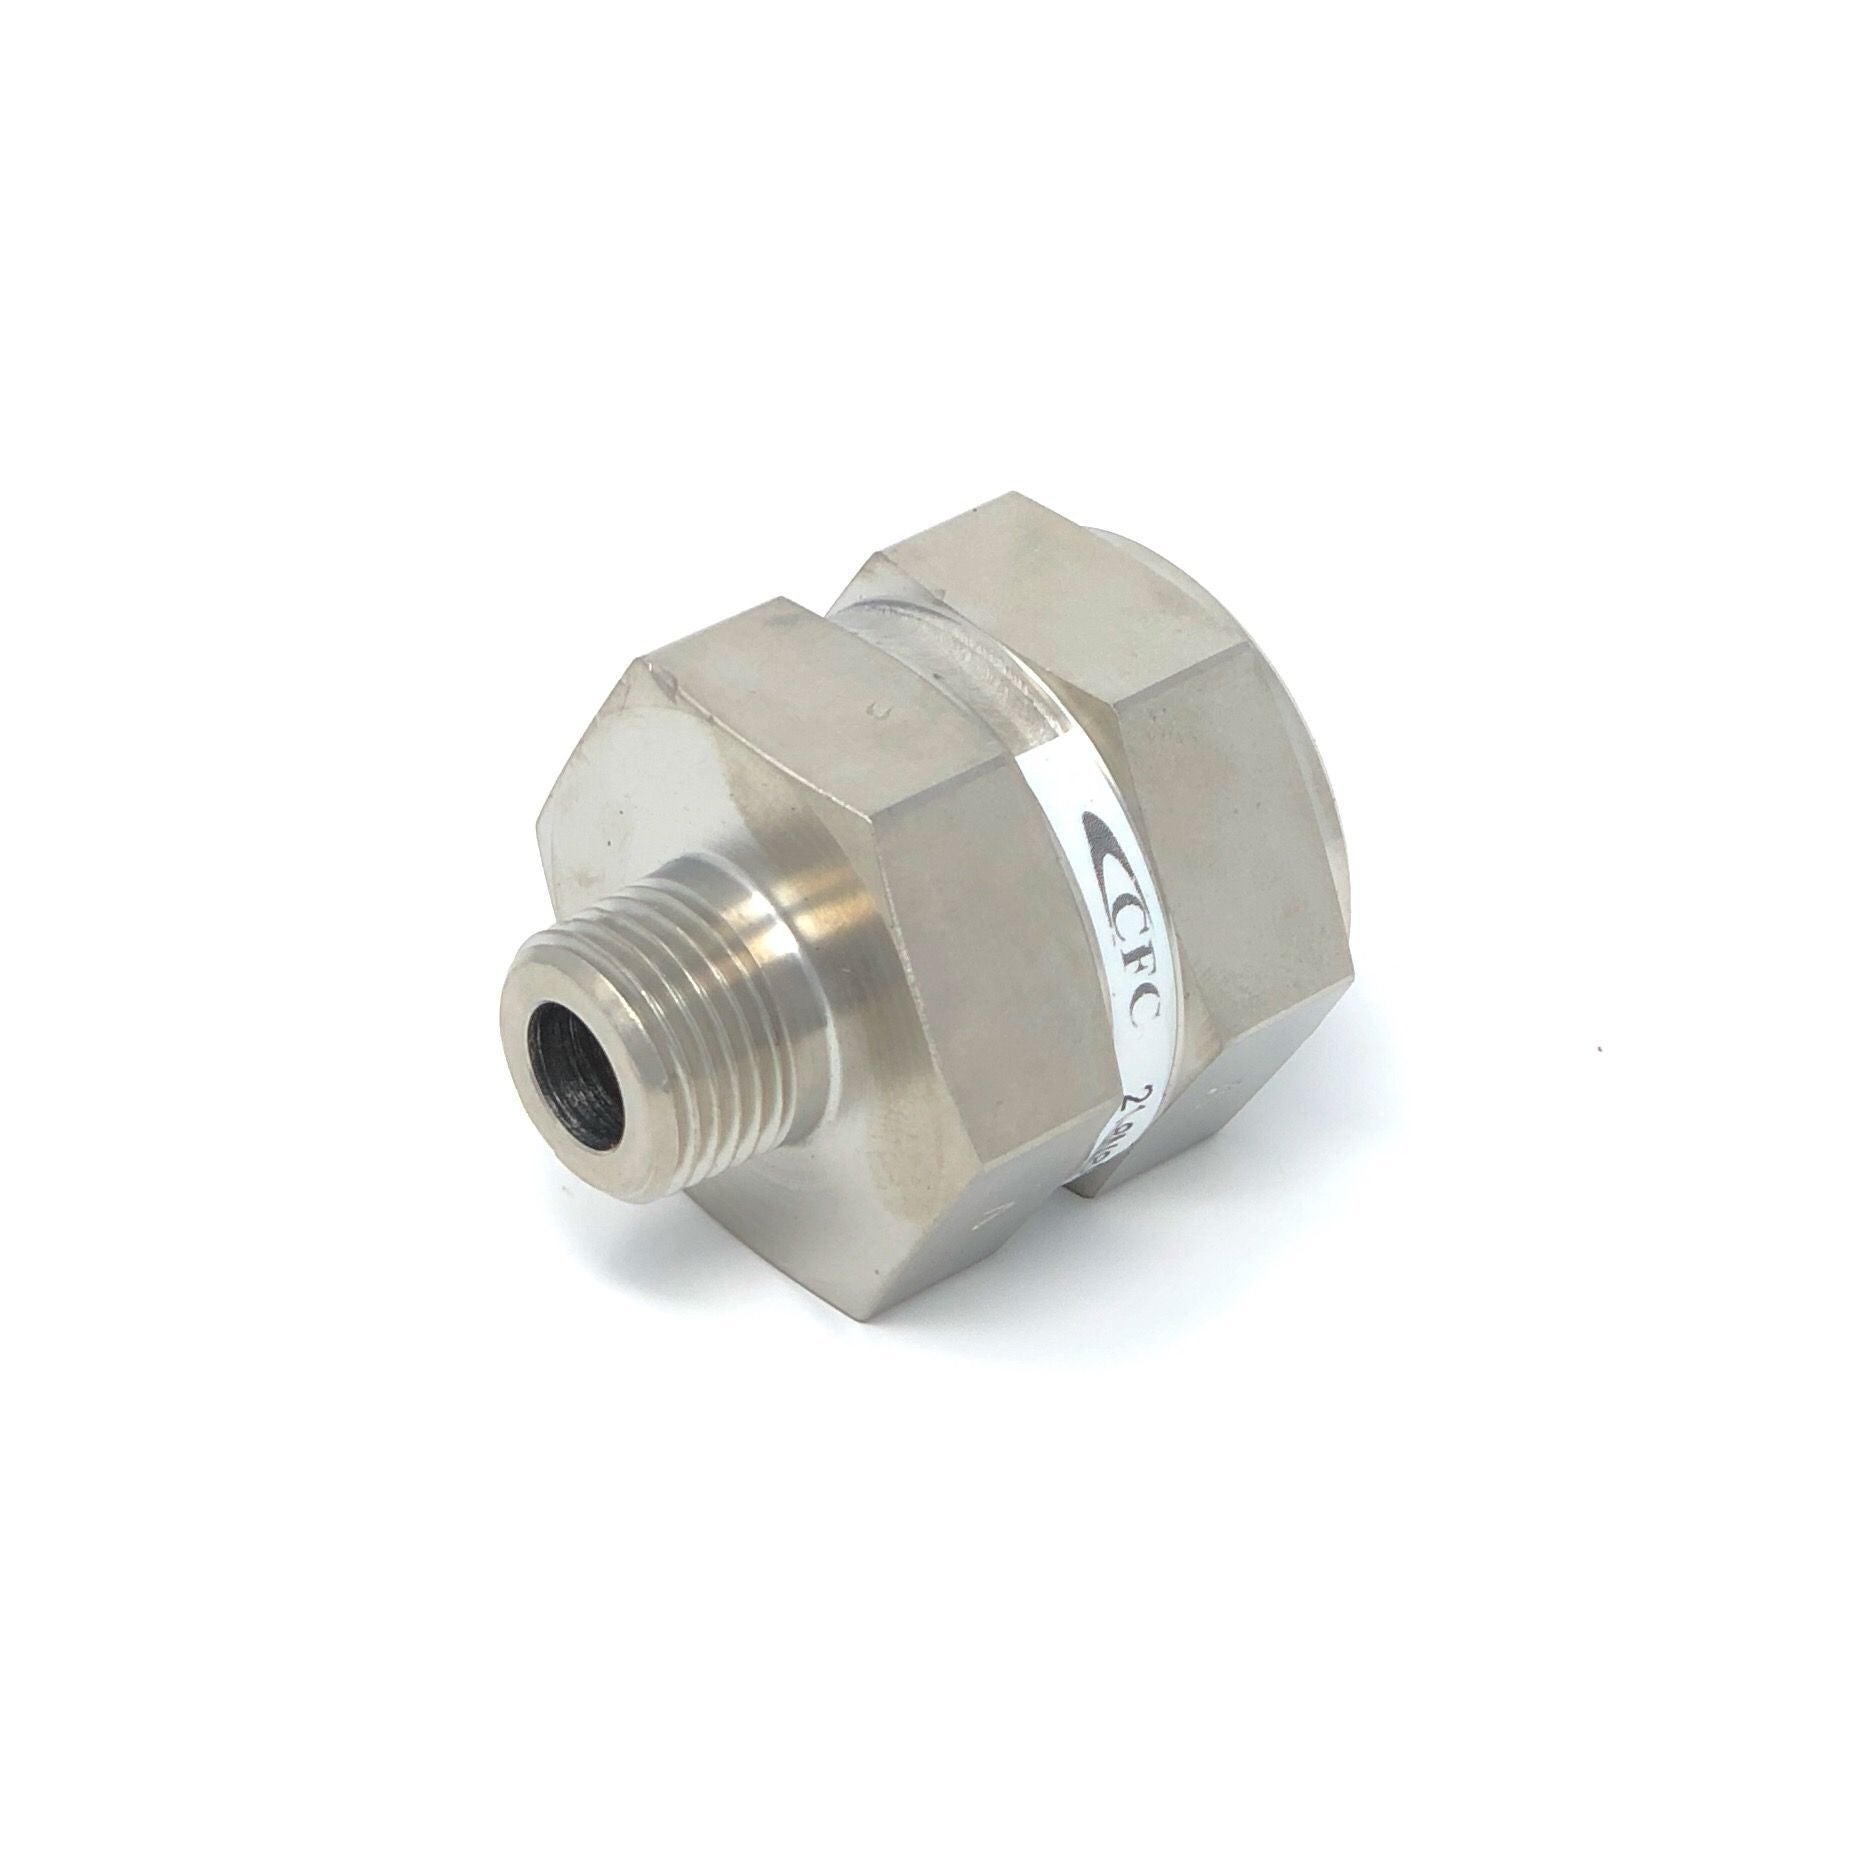 21-4S4S-40S : Chase High Pressure Inline Filter, 6000psi, #4 SAE (1/4"), 40 Micron, No Visual Indicator, No Bypass